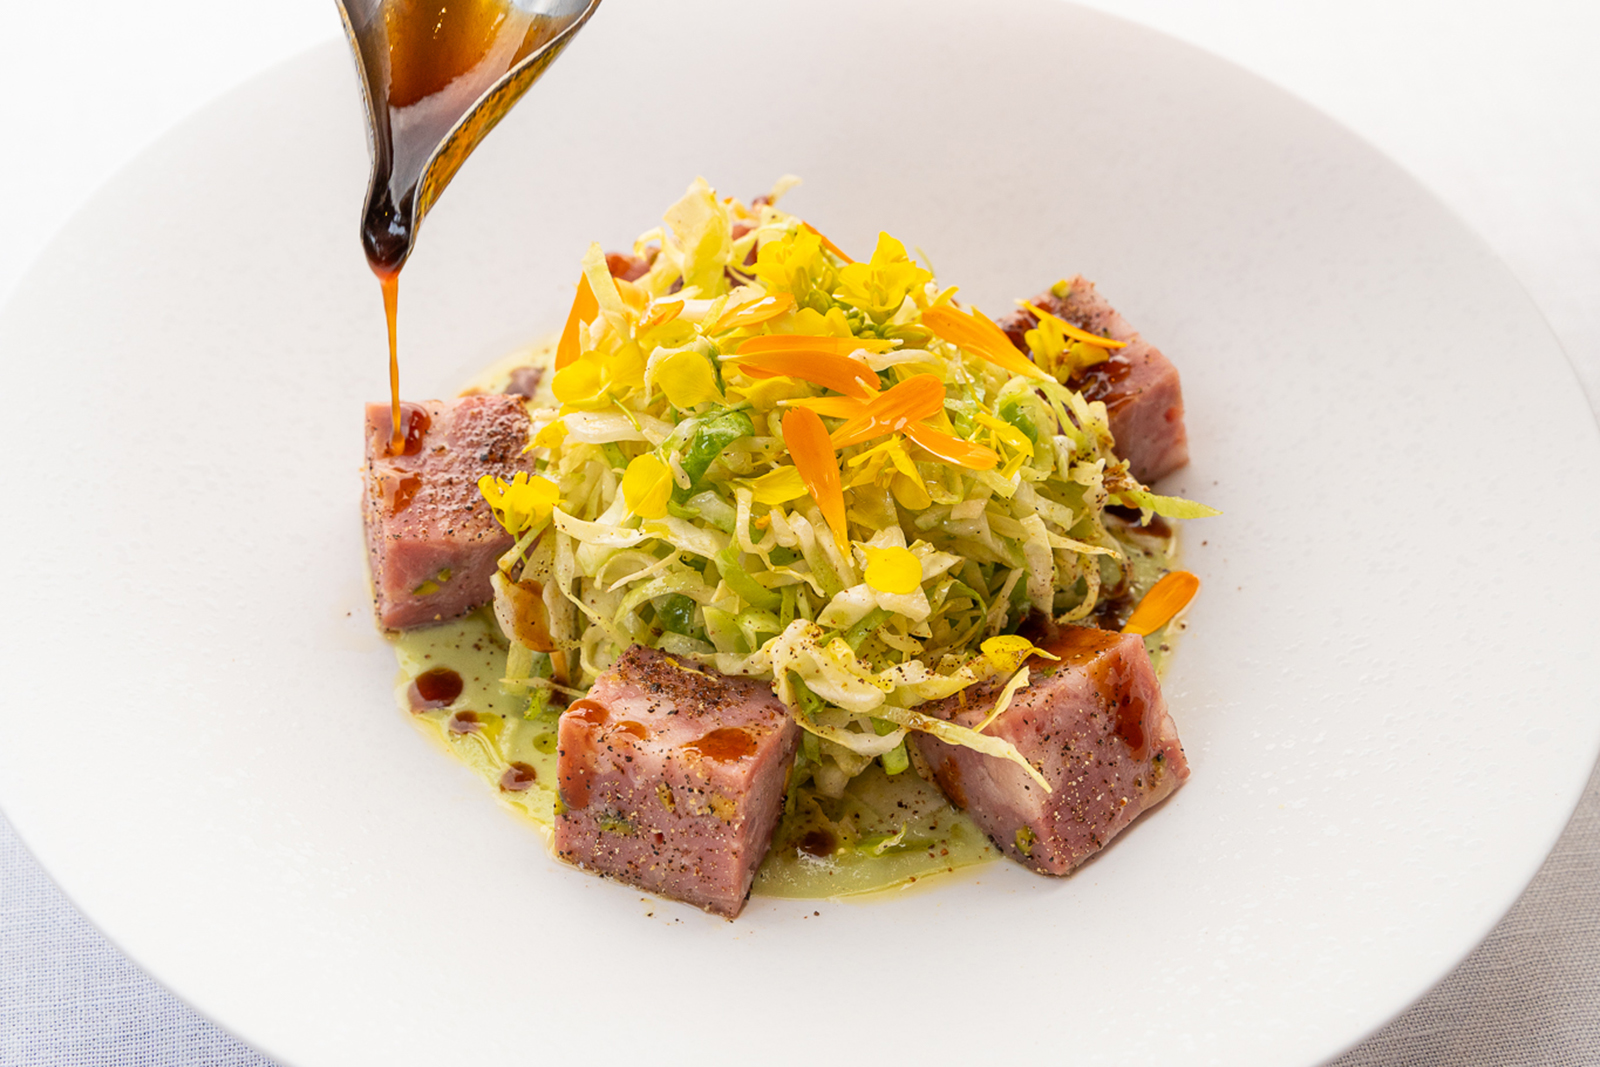 Pistachio Lyonnais sausage served warm with a spring cabbage salad and a hint of juniper berry flavor. A reduction of pork jus is poured over the appetizer before serving.